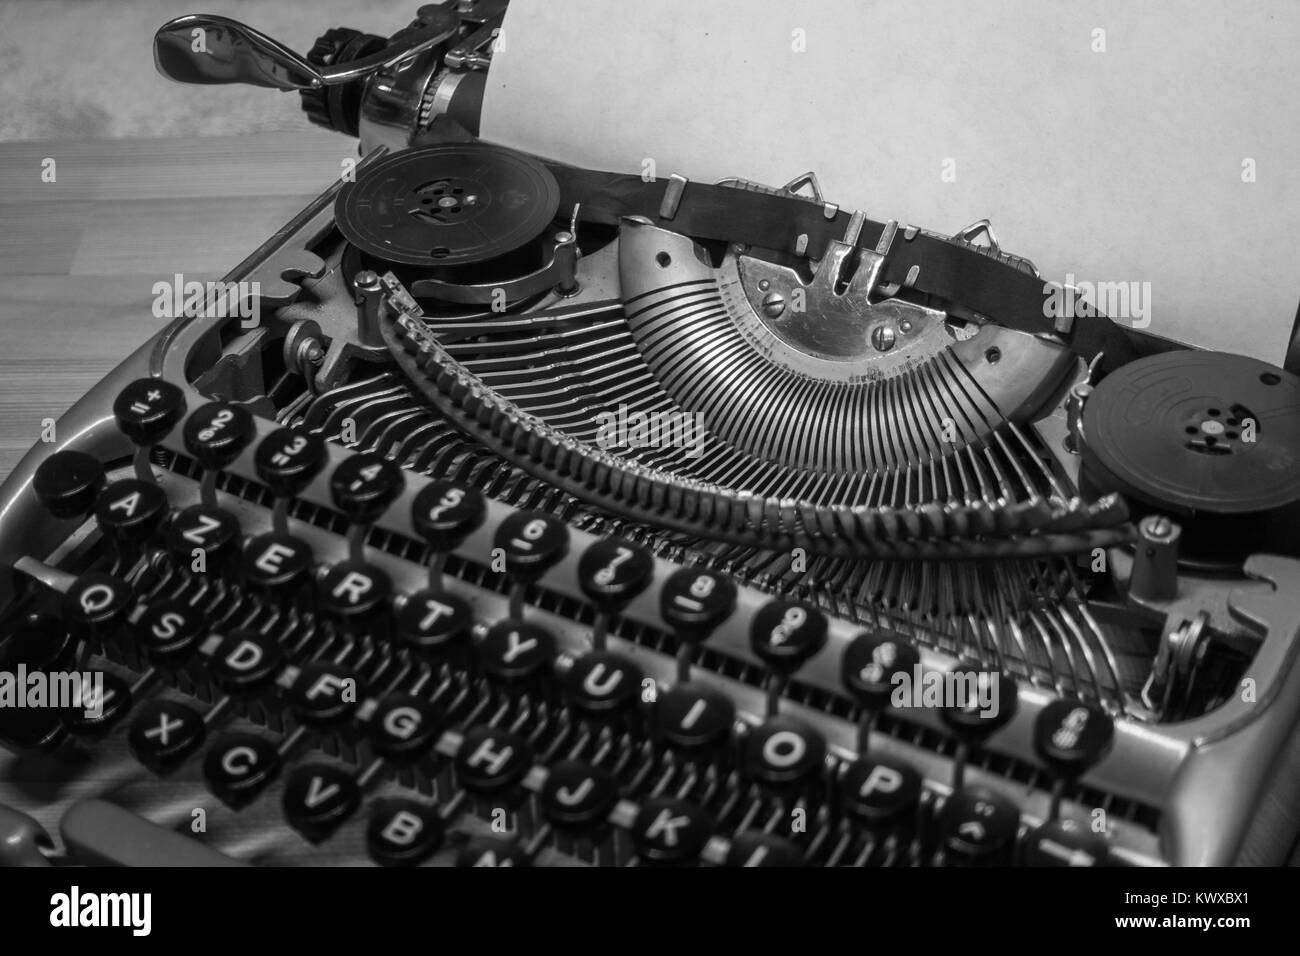 Typewriter ready for use with blank paper installed Stock Photo